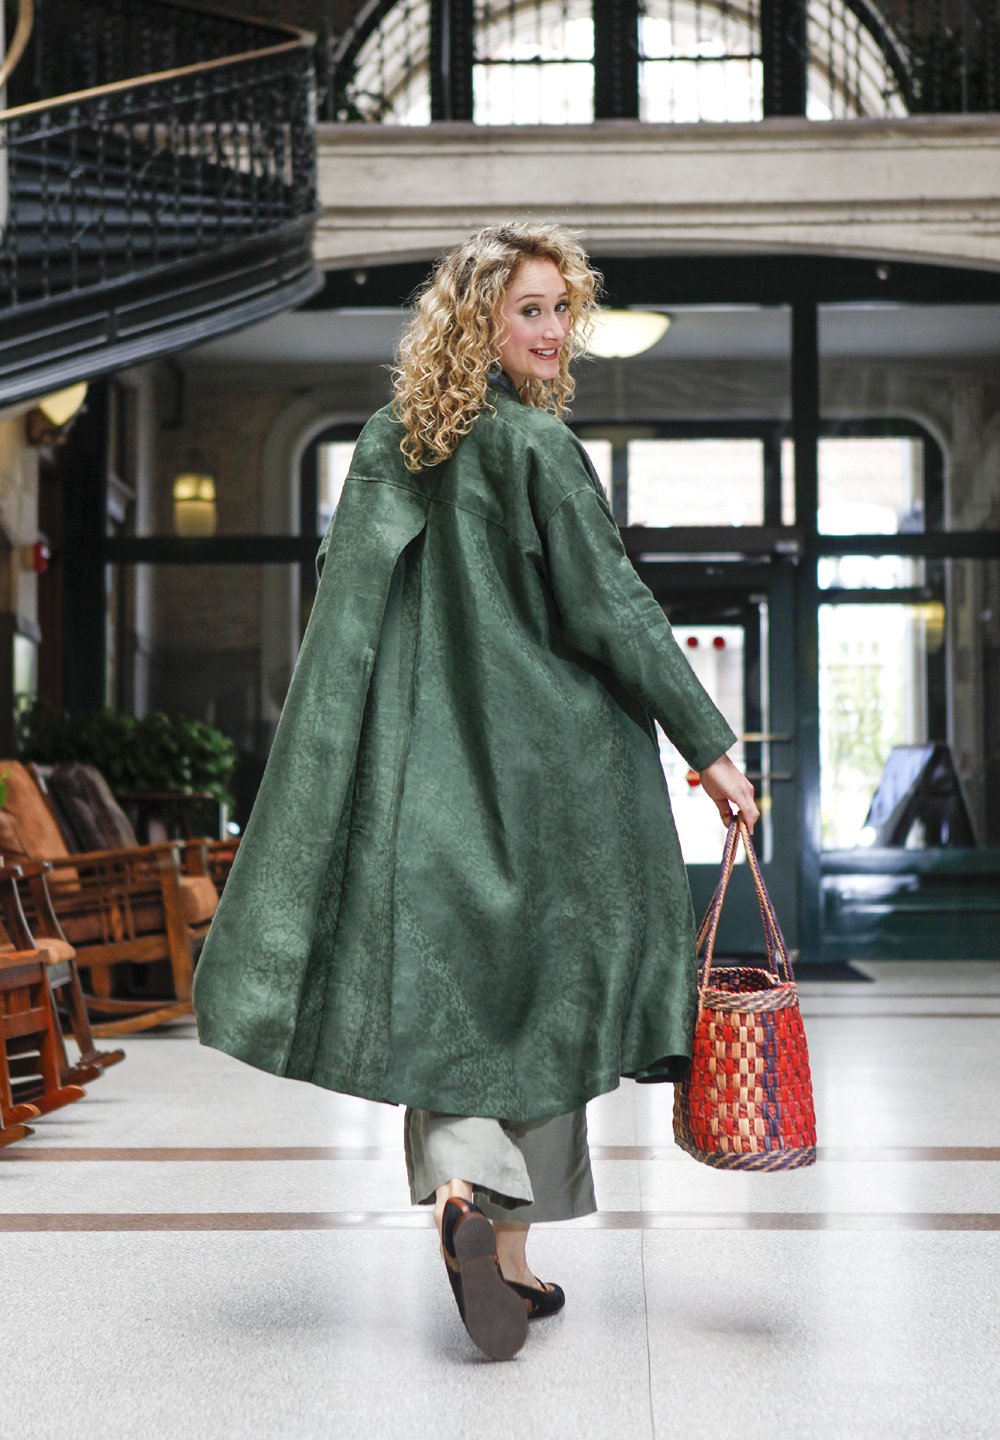 Blonde white woman walking through hallway with her hand in her pocket and holding a woven purse. Wearing the 254 Swing Coat closed with a belt.